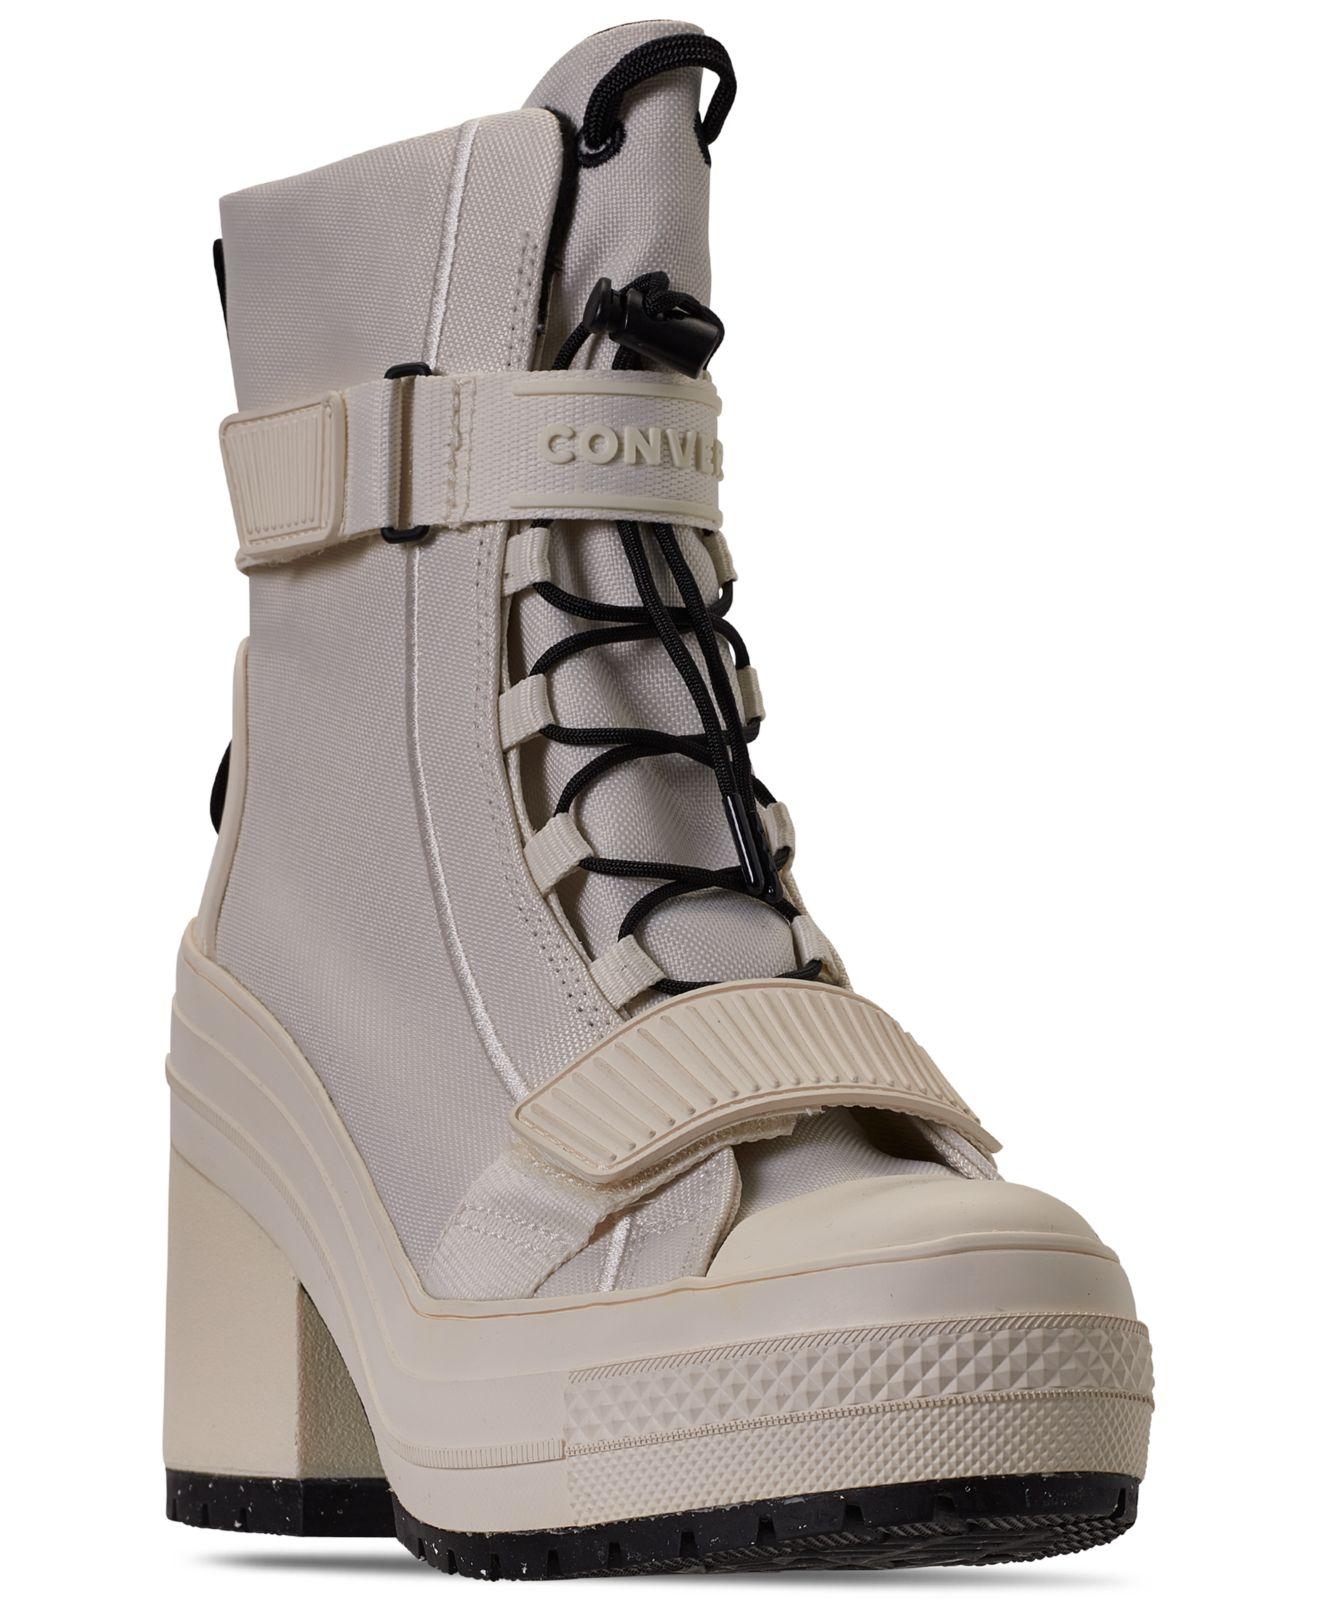 tolv Sow marts Converse Gr-82 Chuck Taylor All Star Boots From Finish Line in White | Lyst